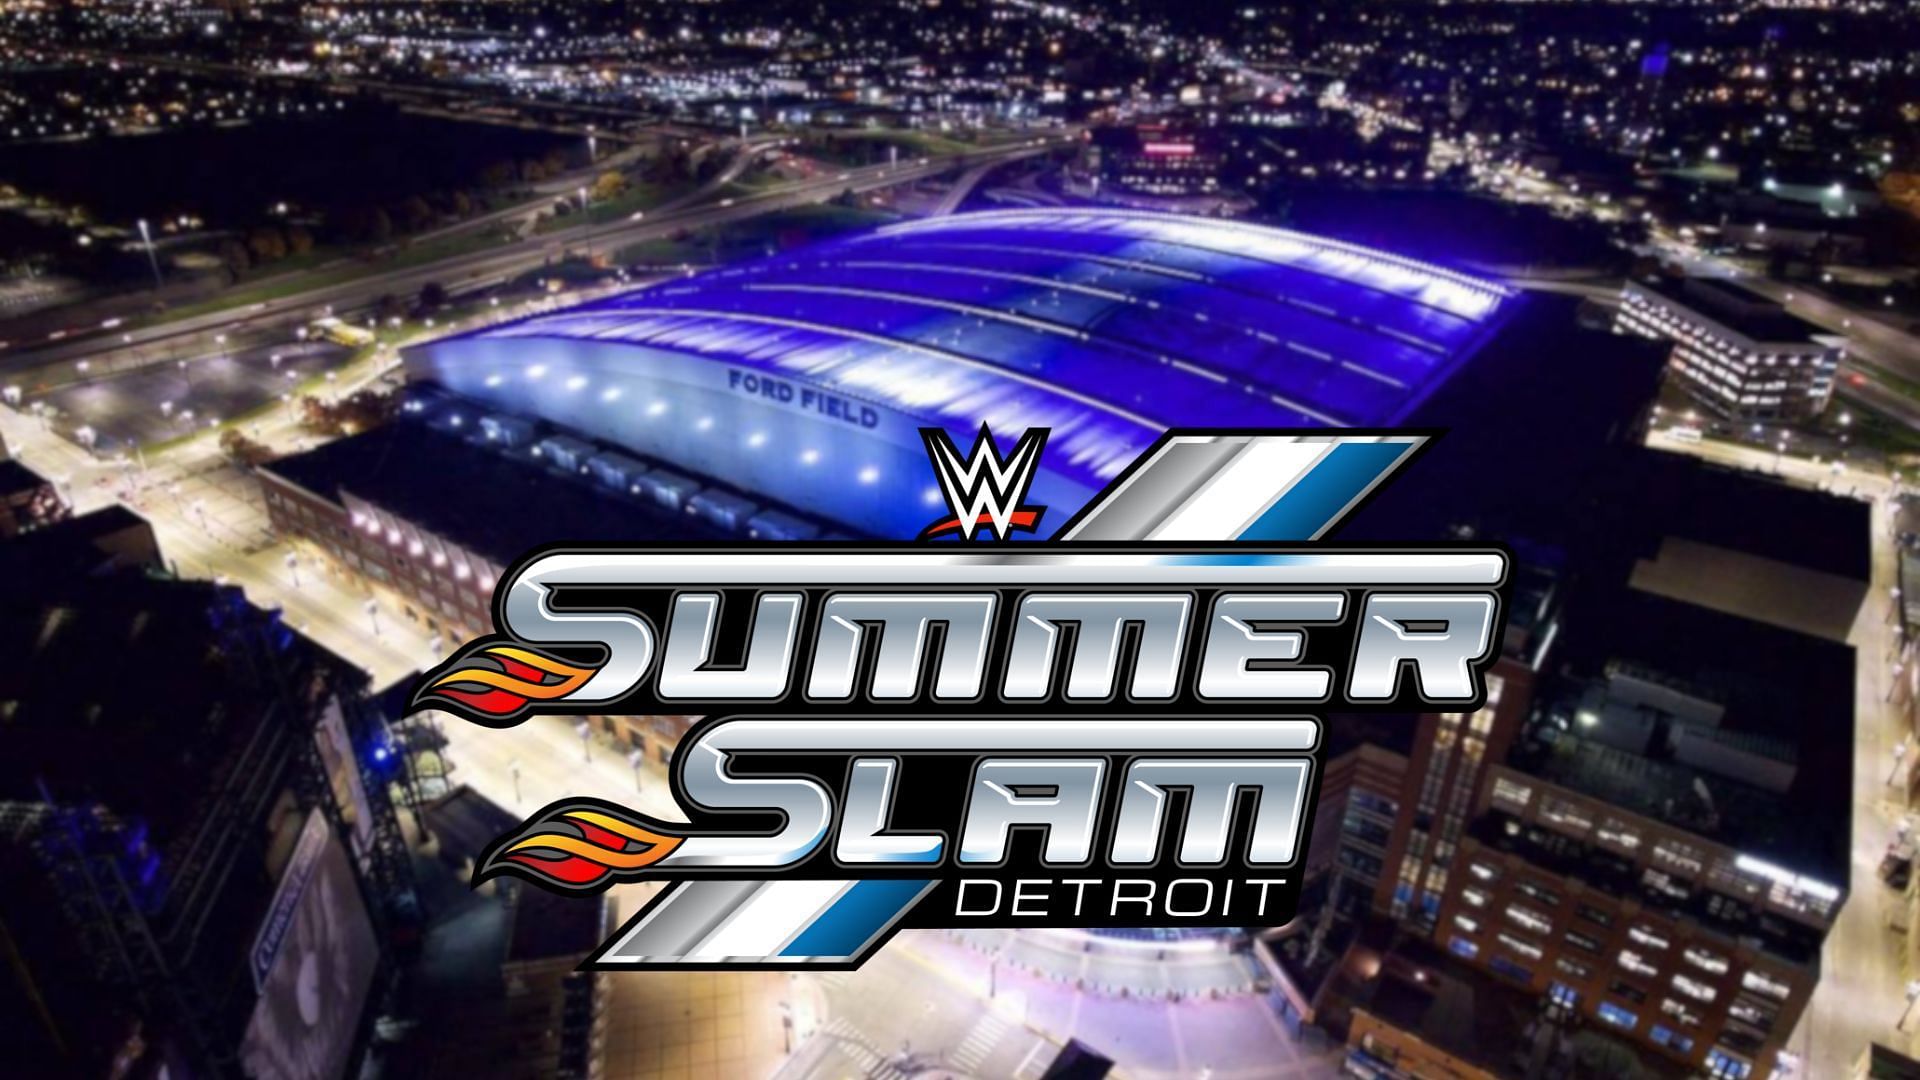 WWE SummerSlam is stacked up with an all-time match card